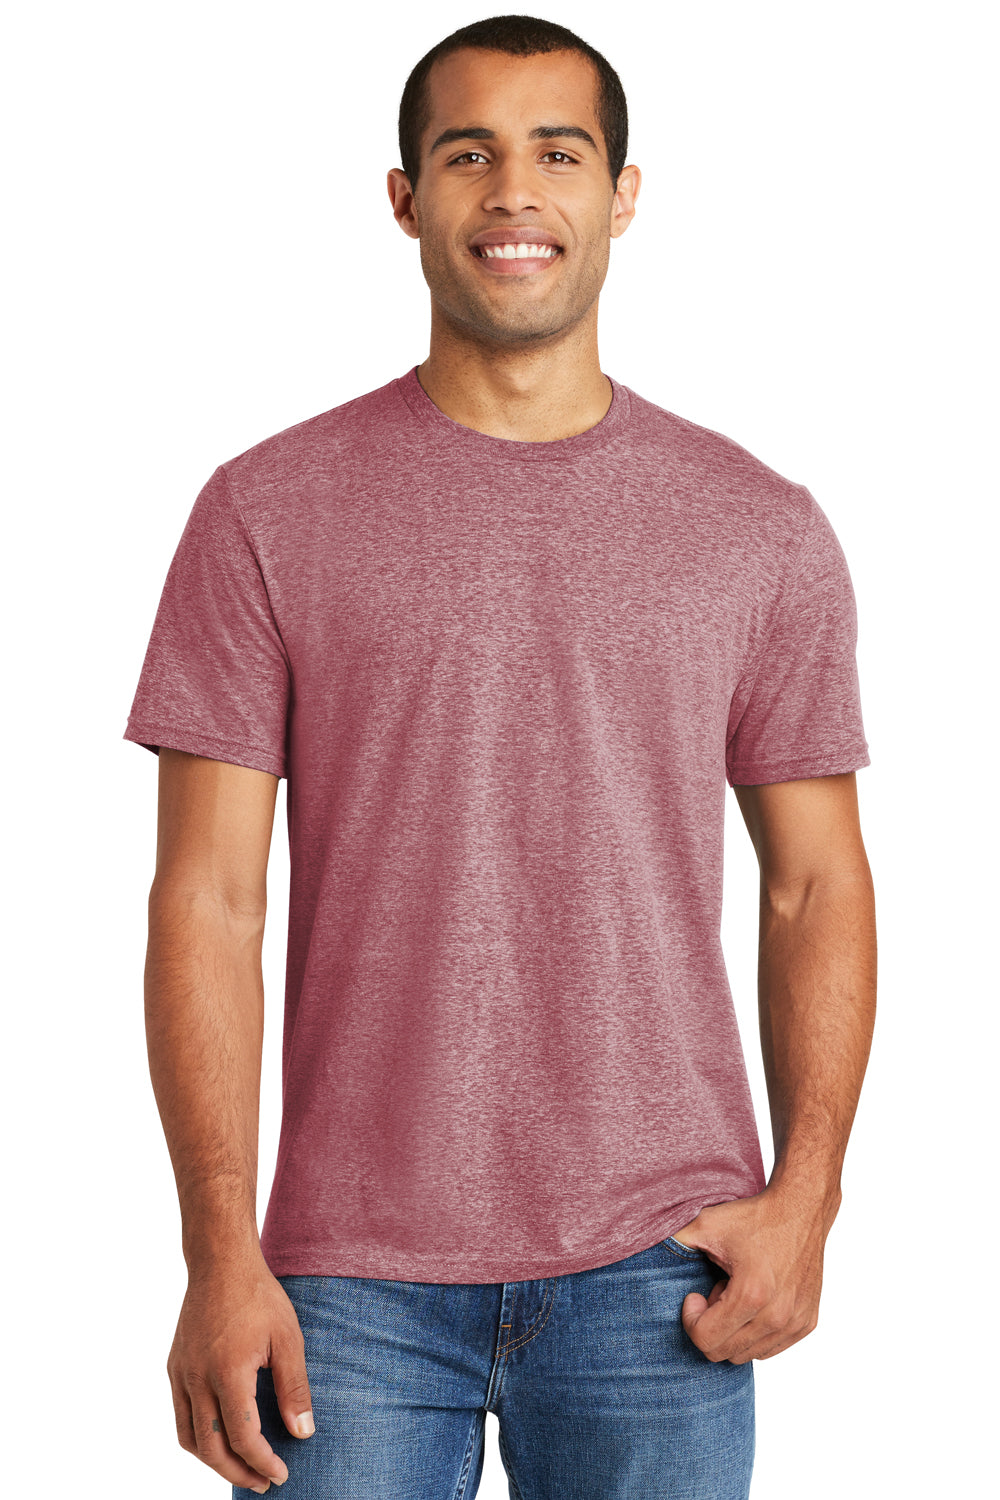 District DT365A Mens Astro Short Sleeve Crewneck T-Shirt Maroon Front